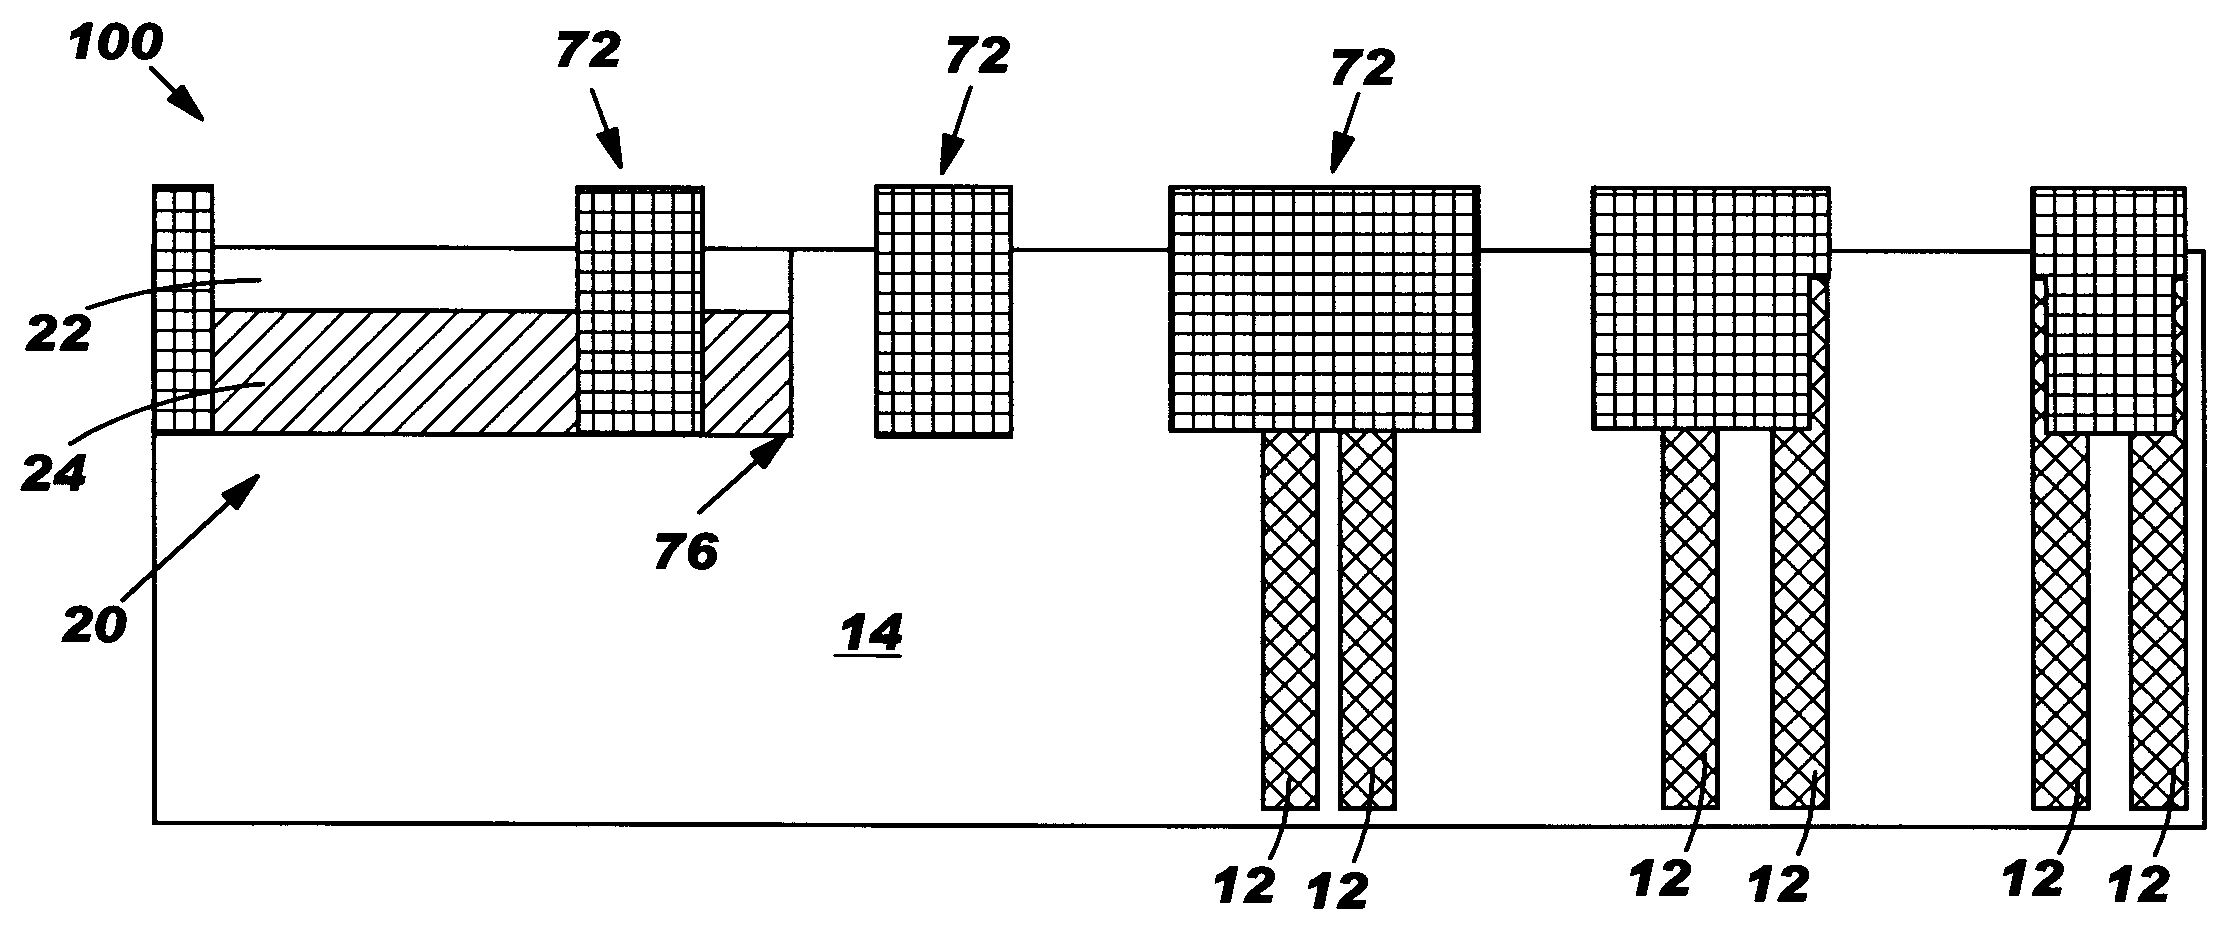 STI formation in semiconductor device including SOI and bulk silicon regions